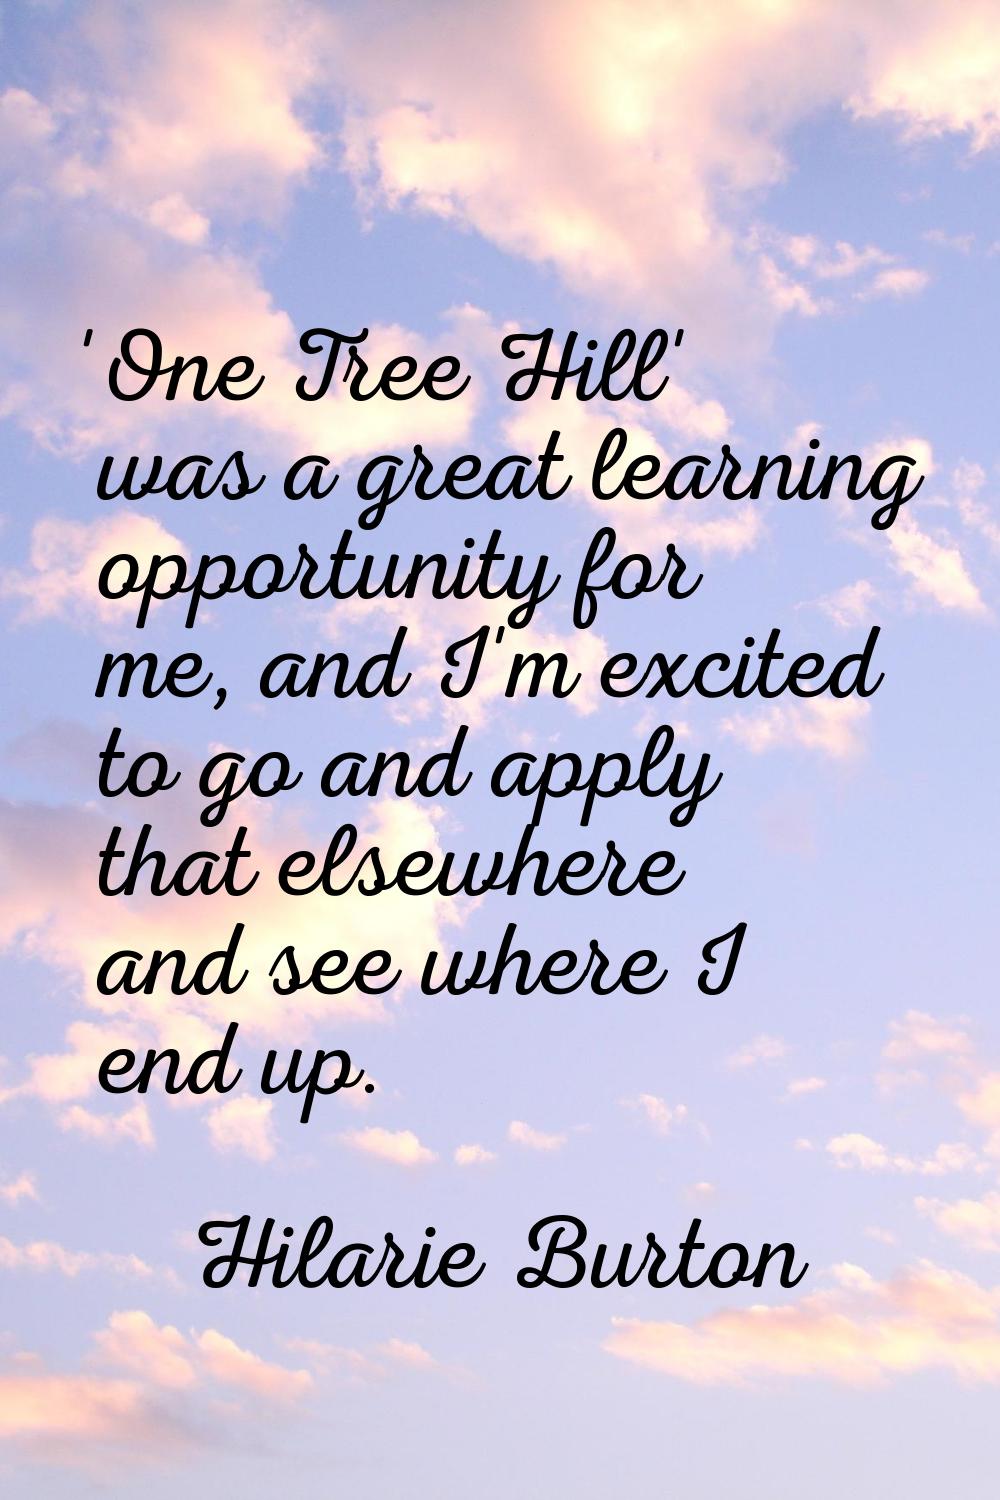 'One Tree Hill' was a great learning opportunity for me, and I'm excited to go and apply that elsew